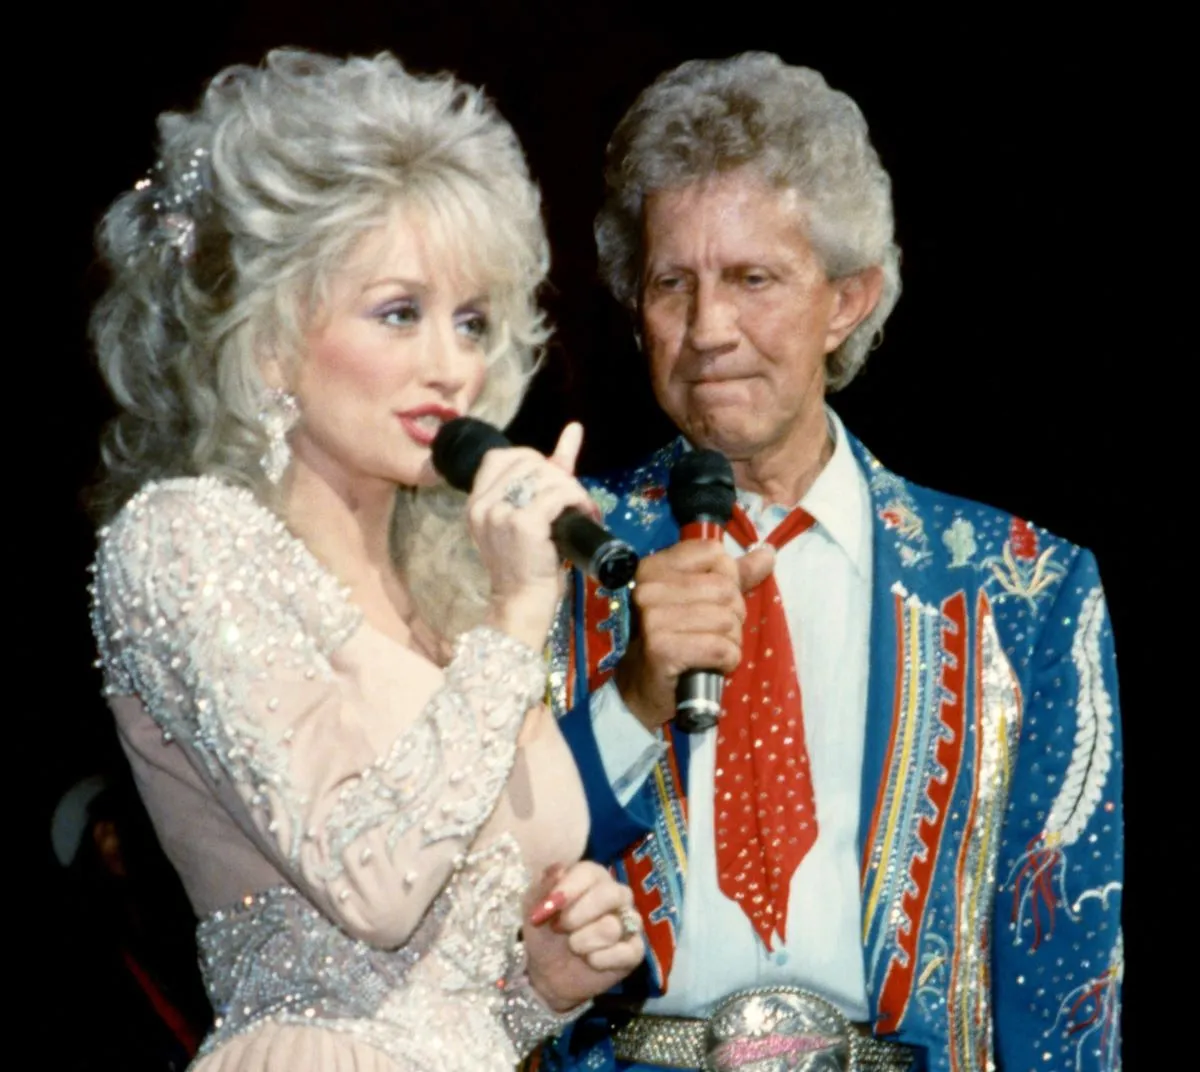 Dolly Parton wears a white dress and speaks into a microphone. Porter Wagoner wears a blue suit and holds a microphone.